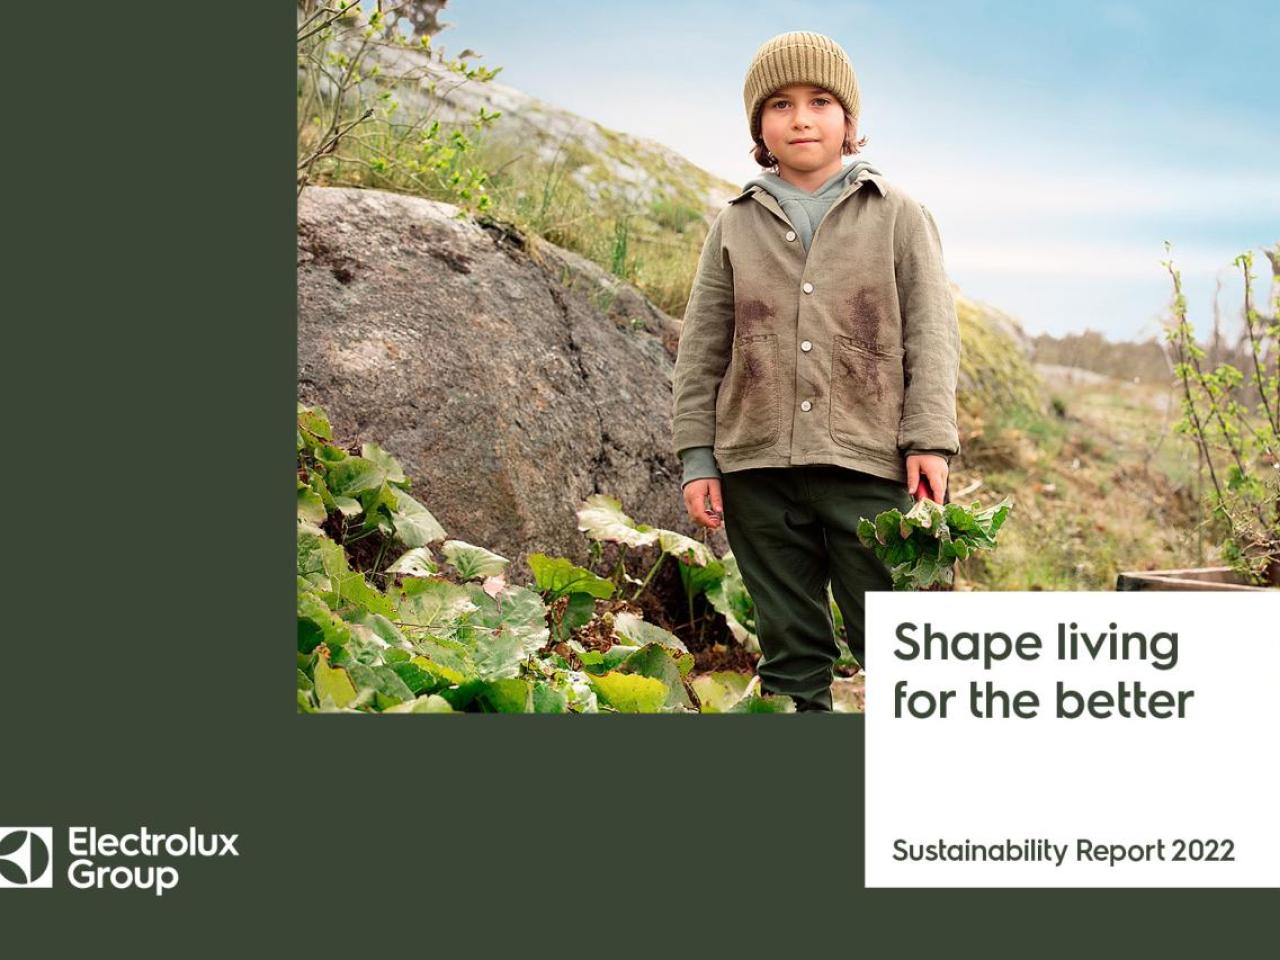 "Shape living for the better Sustainability Report 2022" with Electrolux Group logo and child